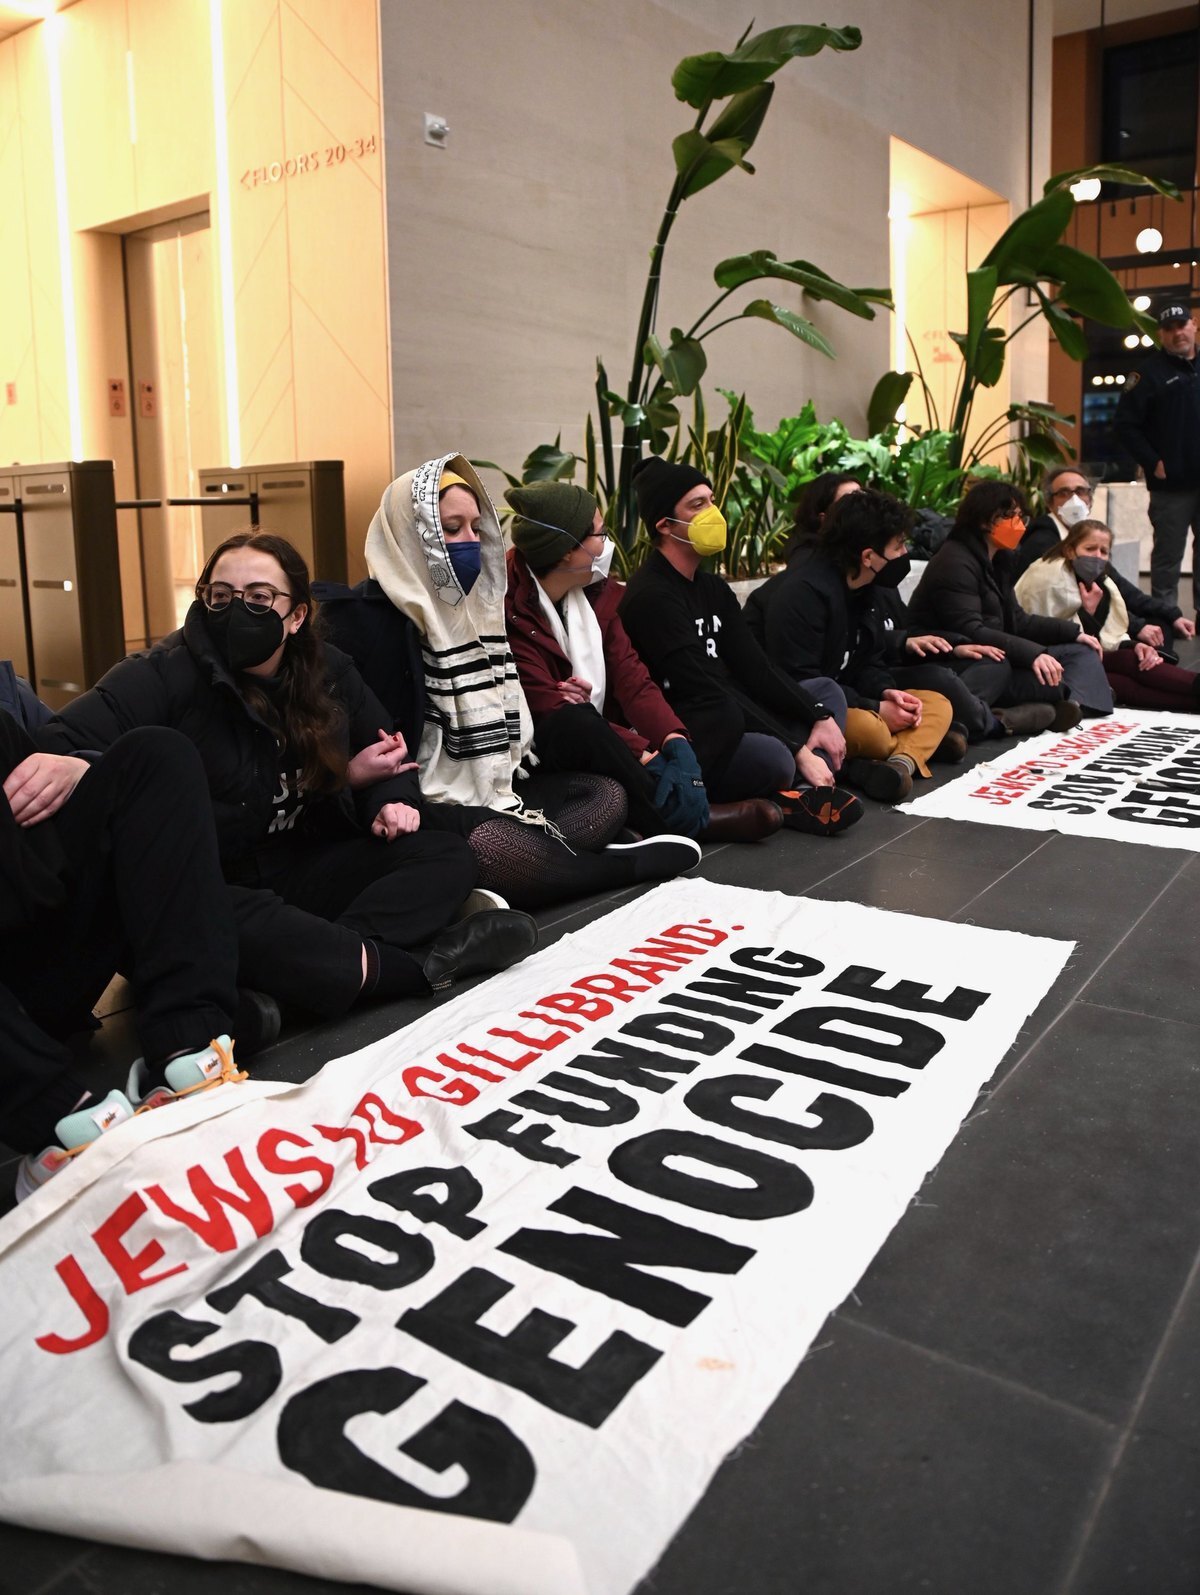 Jewish Voice for Peace protesters and their allies, many holding signs, demonstrate outside the American Israel Public Affairs Committee (AIPAC) headquarters in New York City on February 22, 2024, calling for a permanent ceasefire in Gaza.